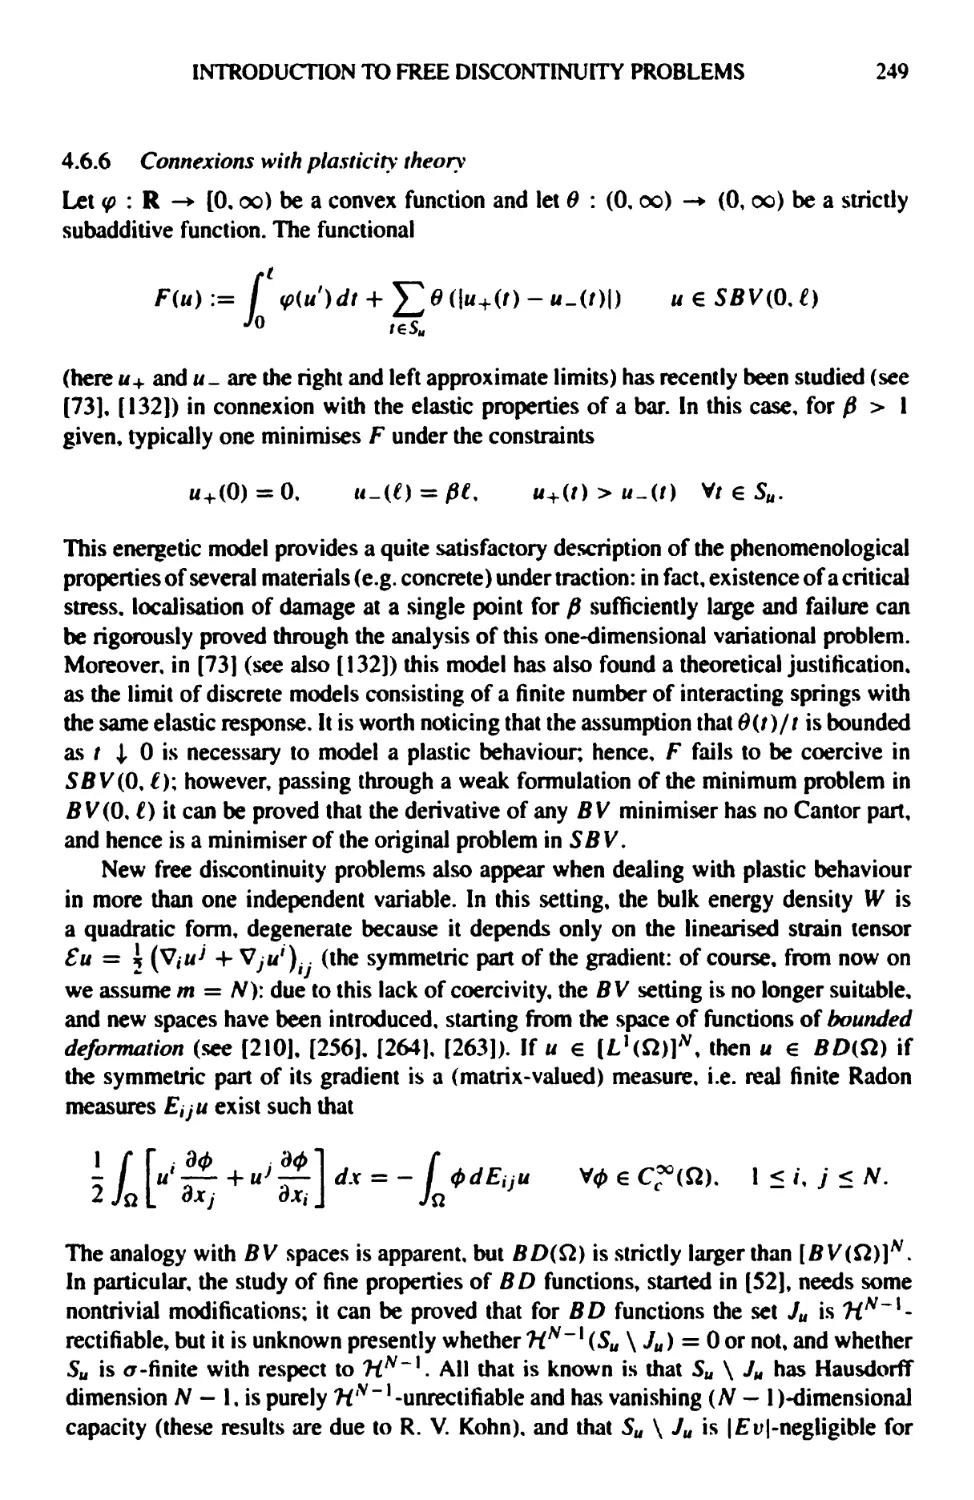 4.6.6 Connexions with plasticity theory